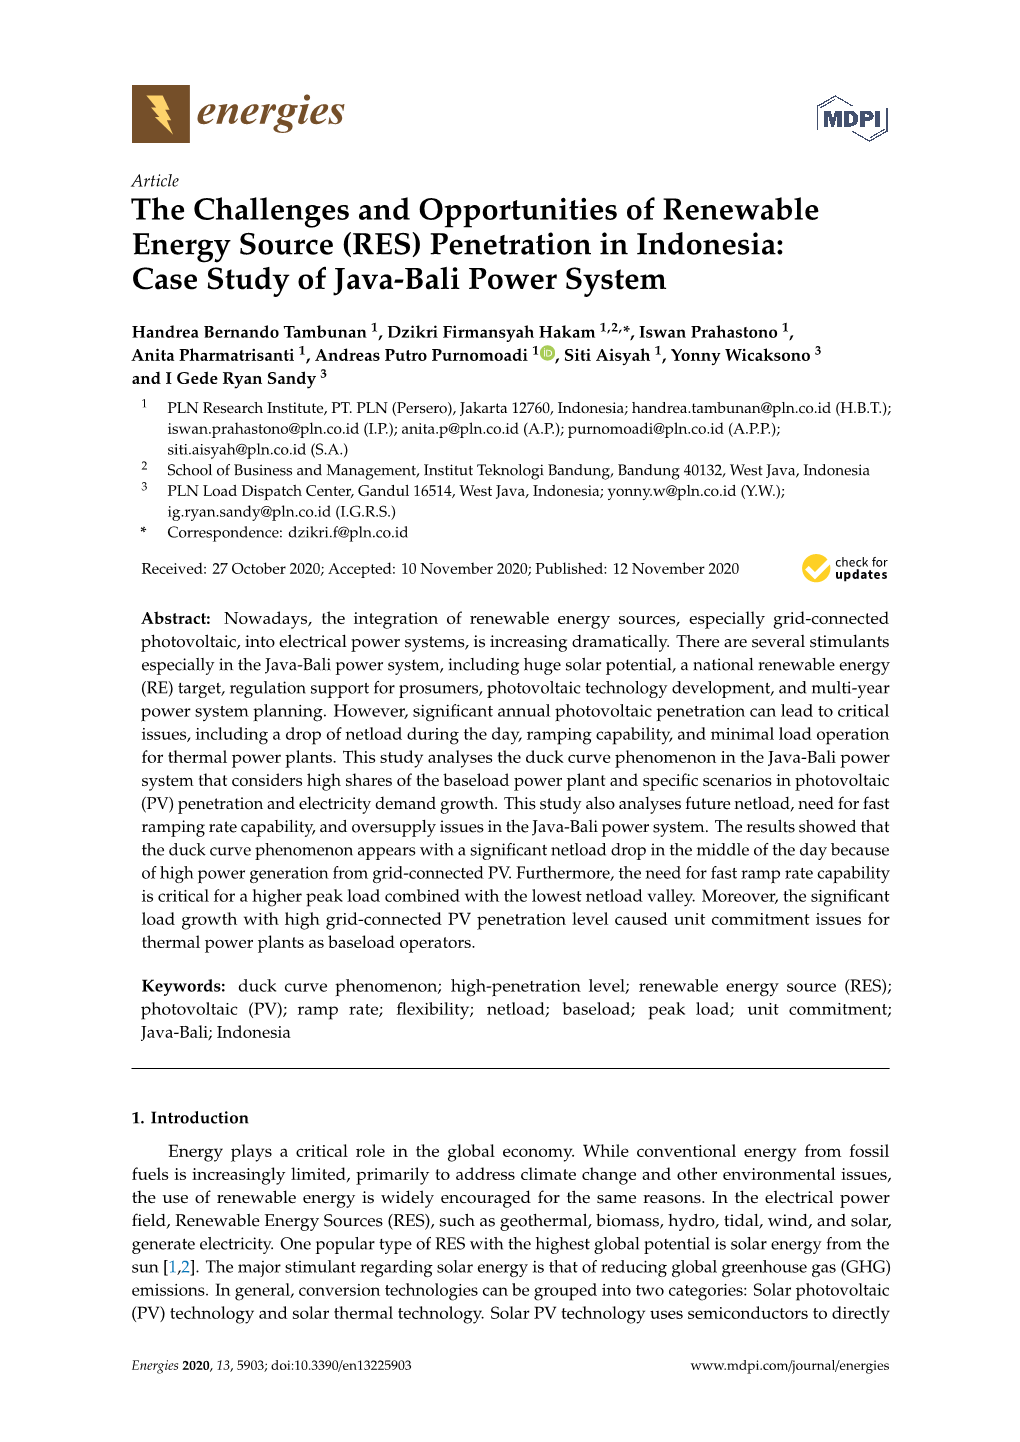 The Challenges and Opportunities of Renewable Energy Source (RES) Penetration in Indonesia: Case Study of Java-Bali Power System